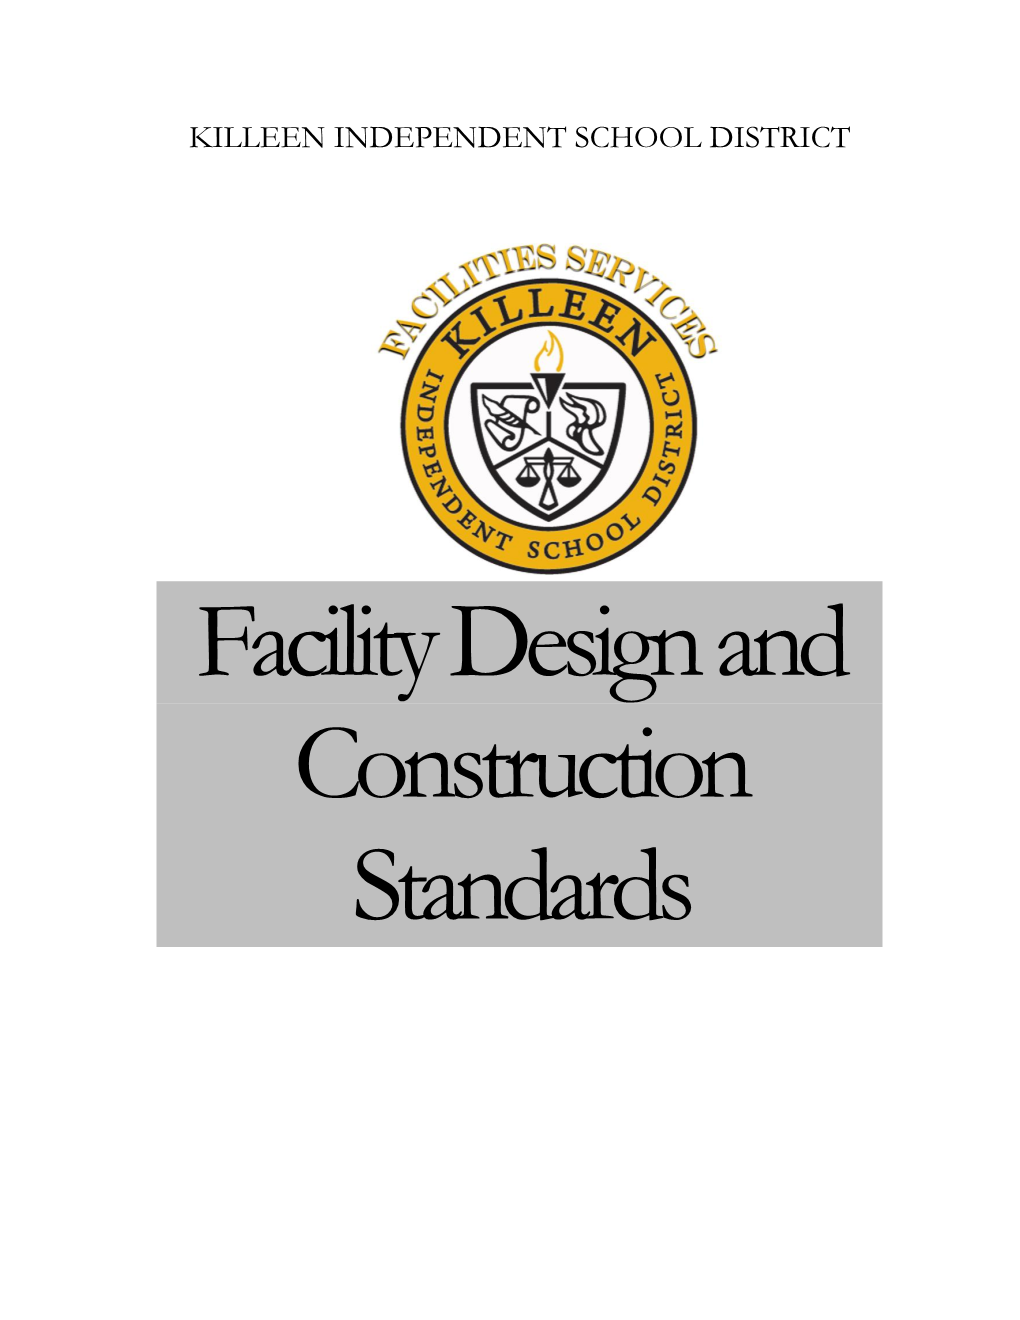 Facility Design and Construction Standards VERSION 1.3OCTOBER 11, 2018, REVISED 06/07/2021